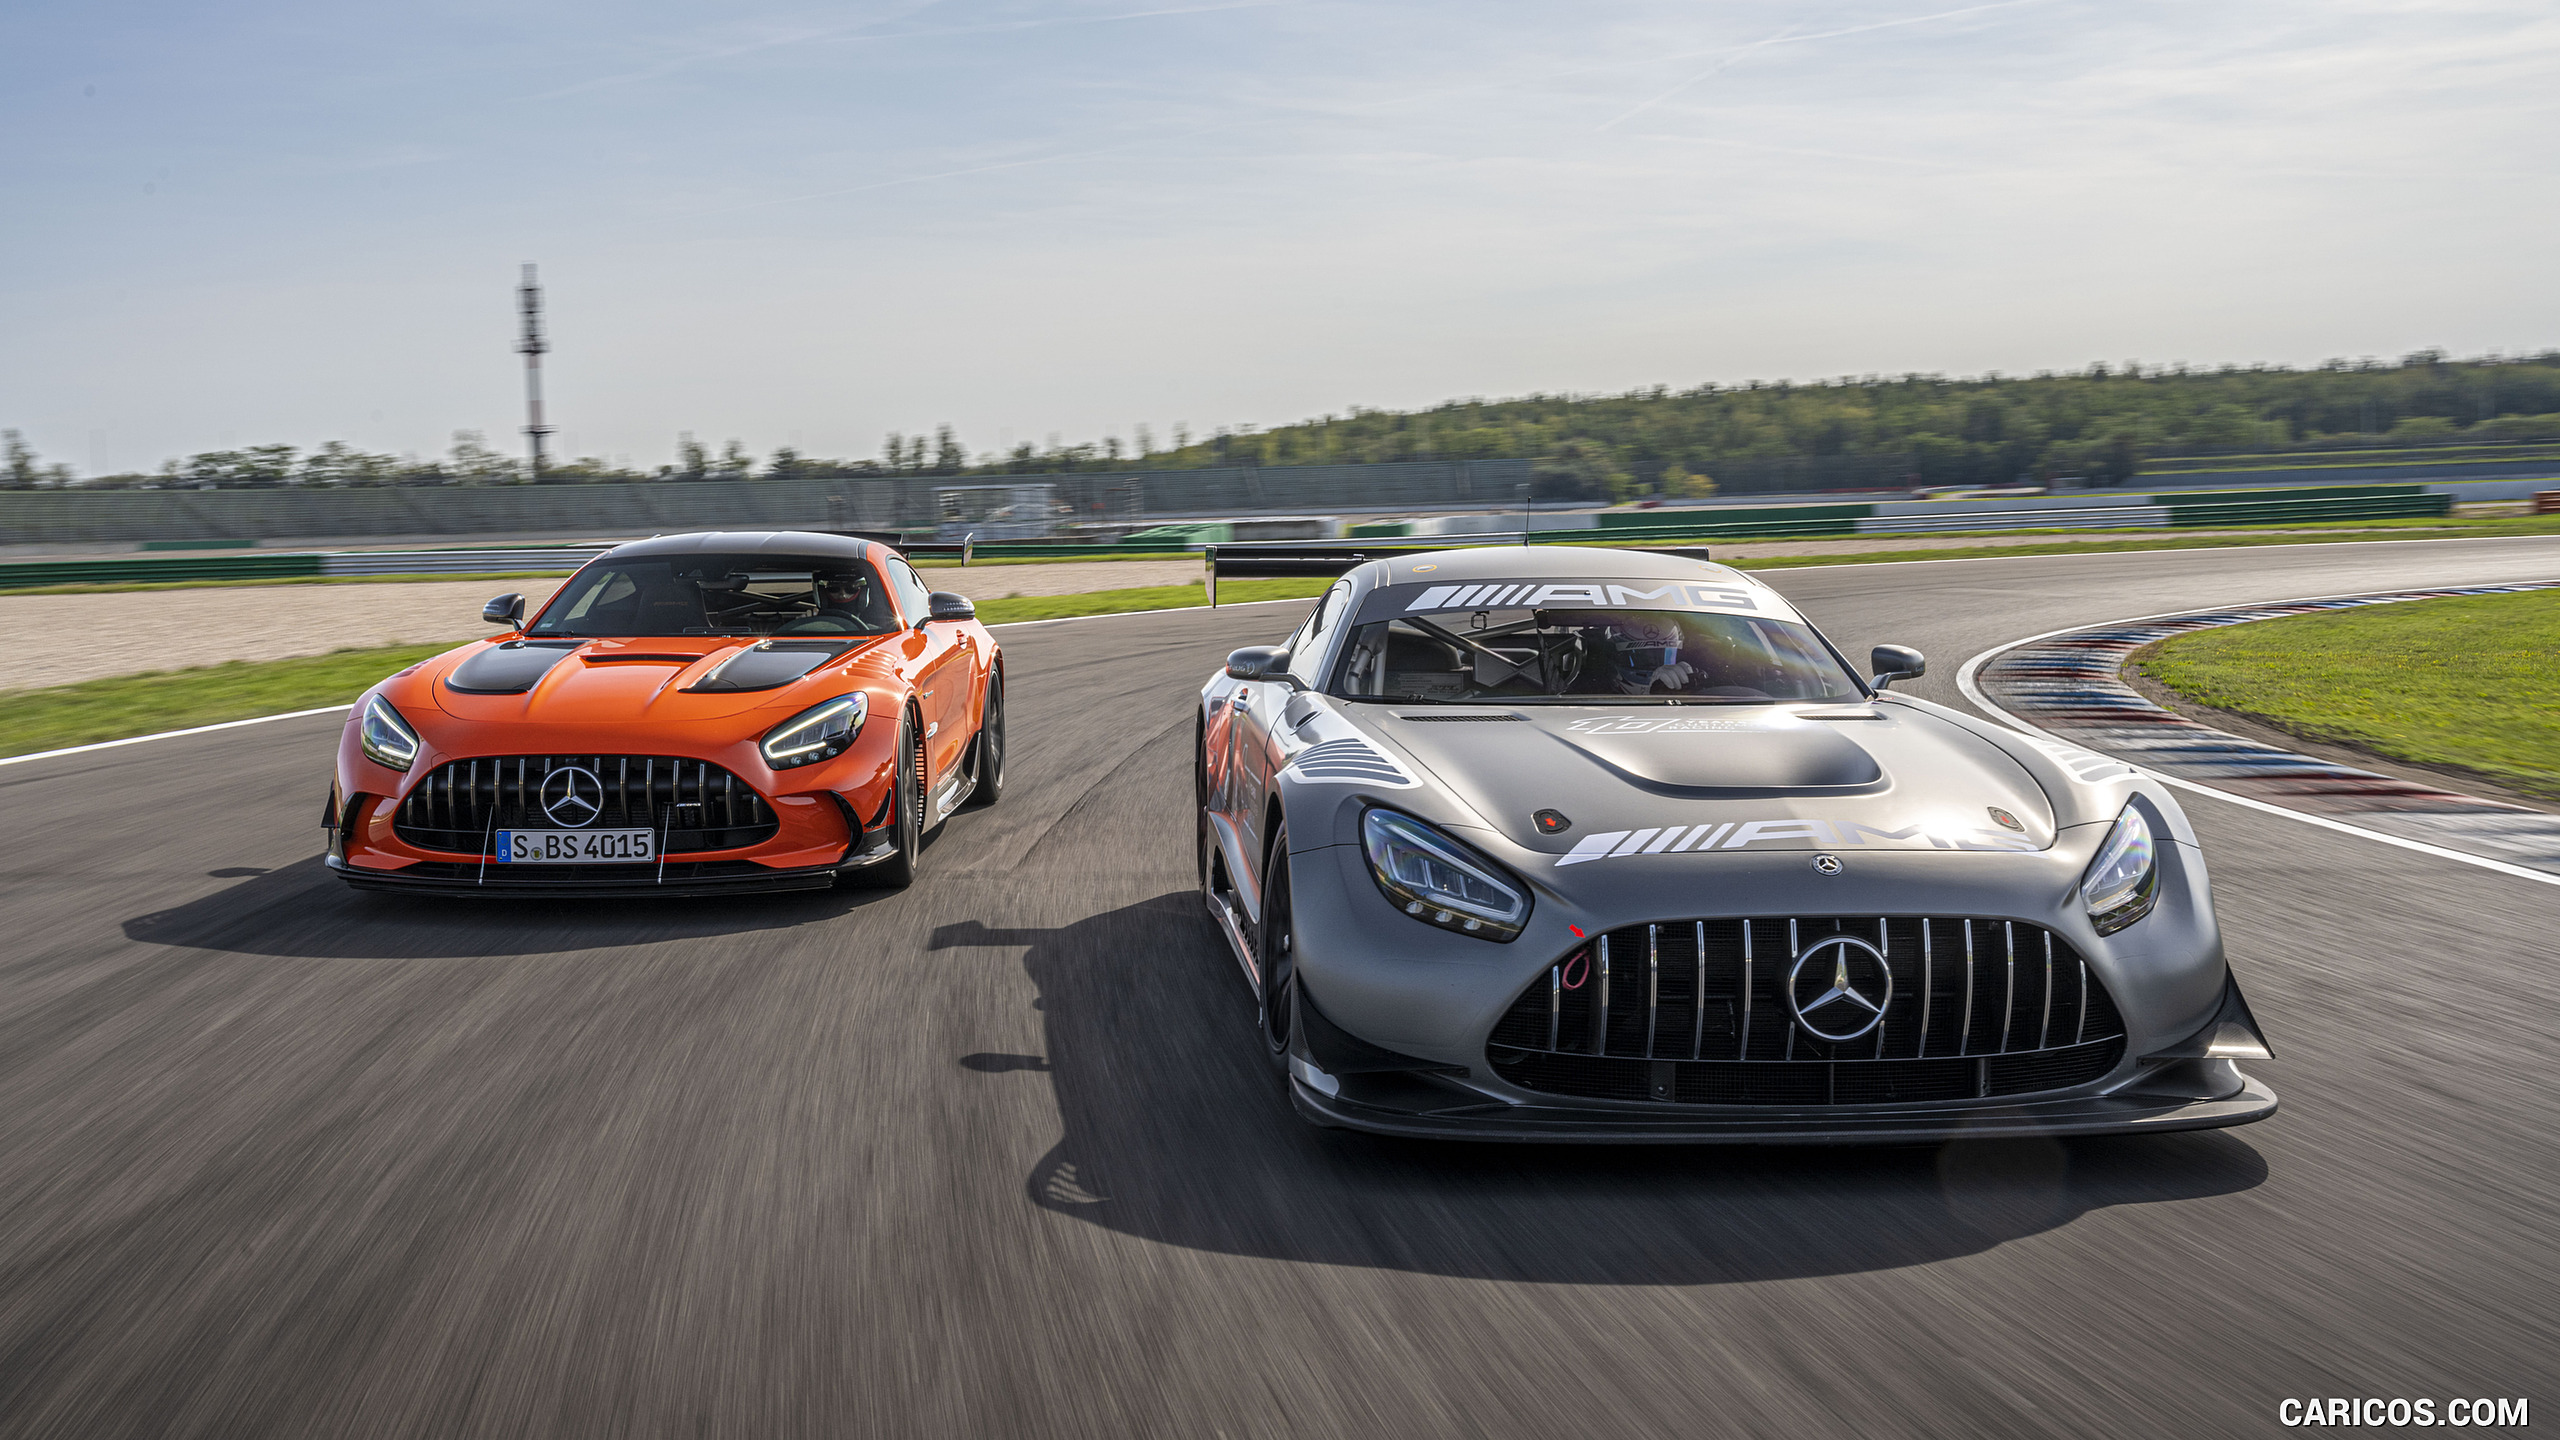 2021 Mercedes-AMG GT Black Series (Color: Magma Beam) and AMG GT3 Racing Car, #140 of 215